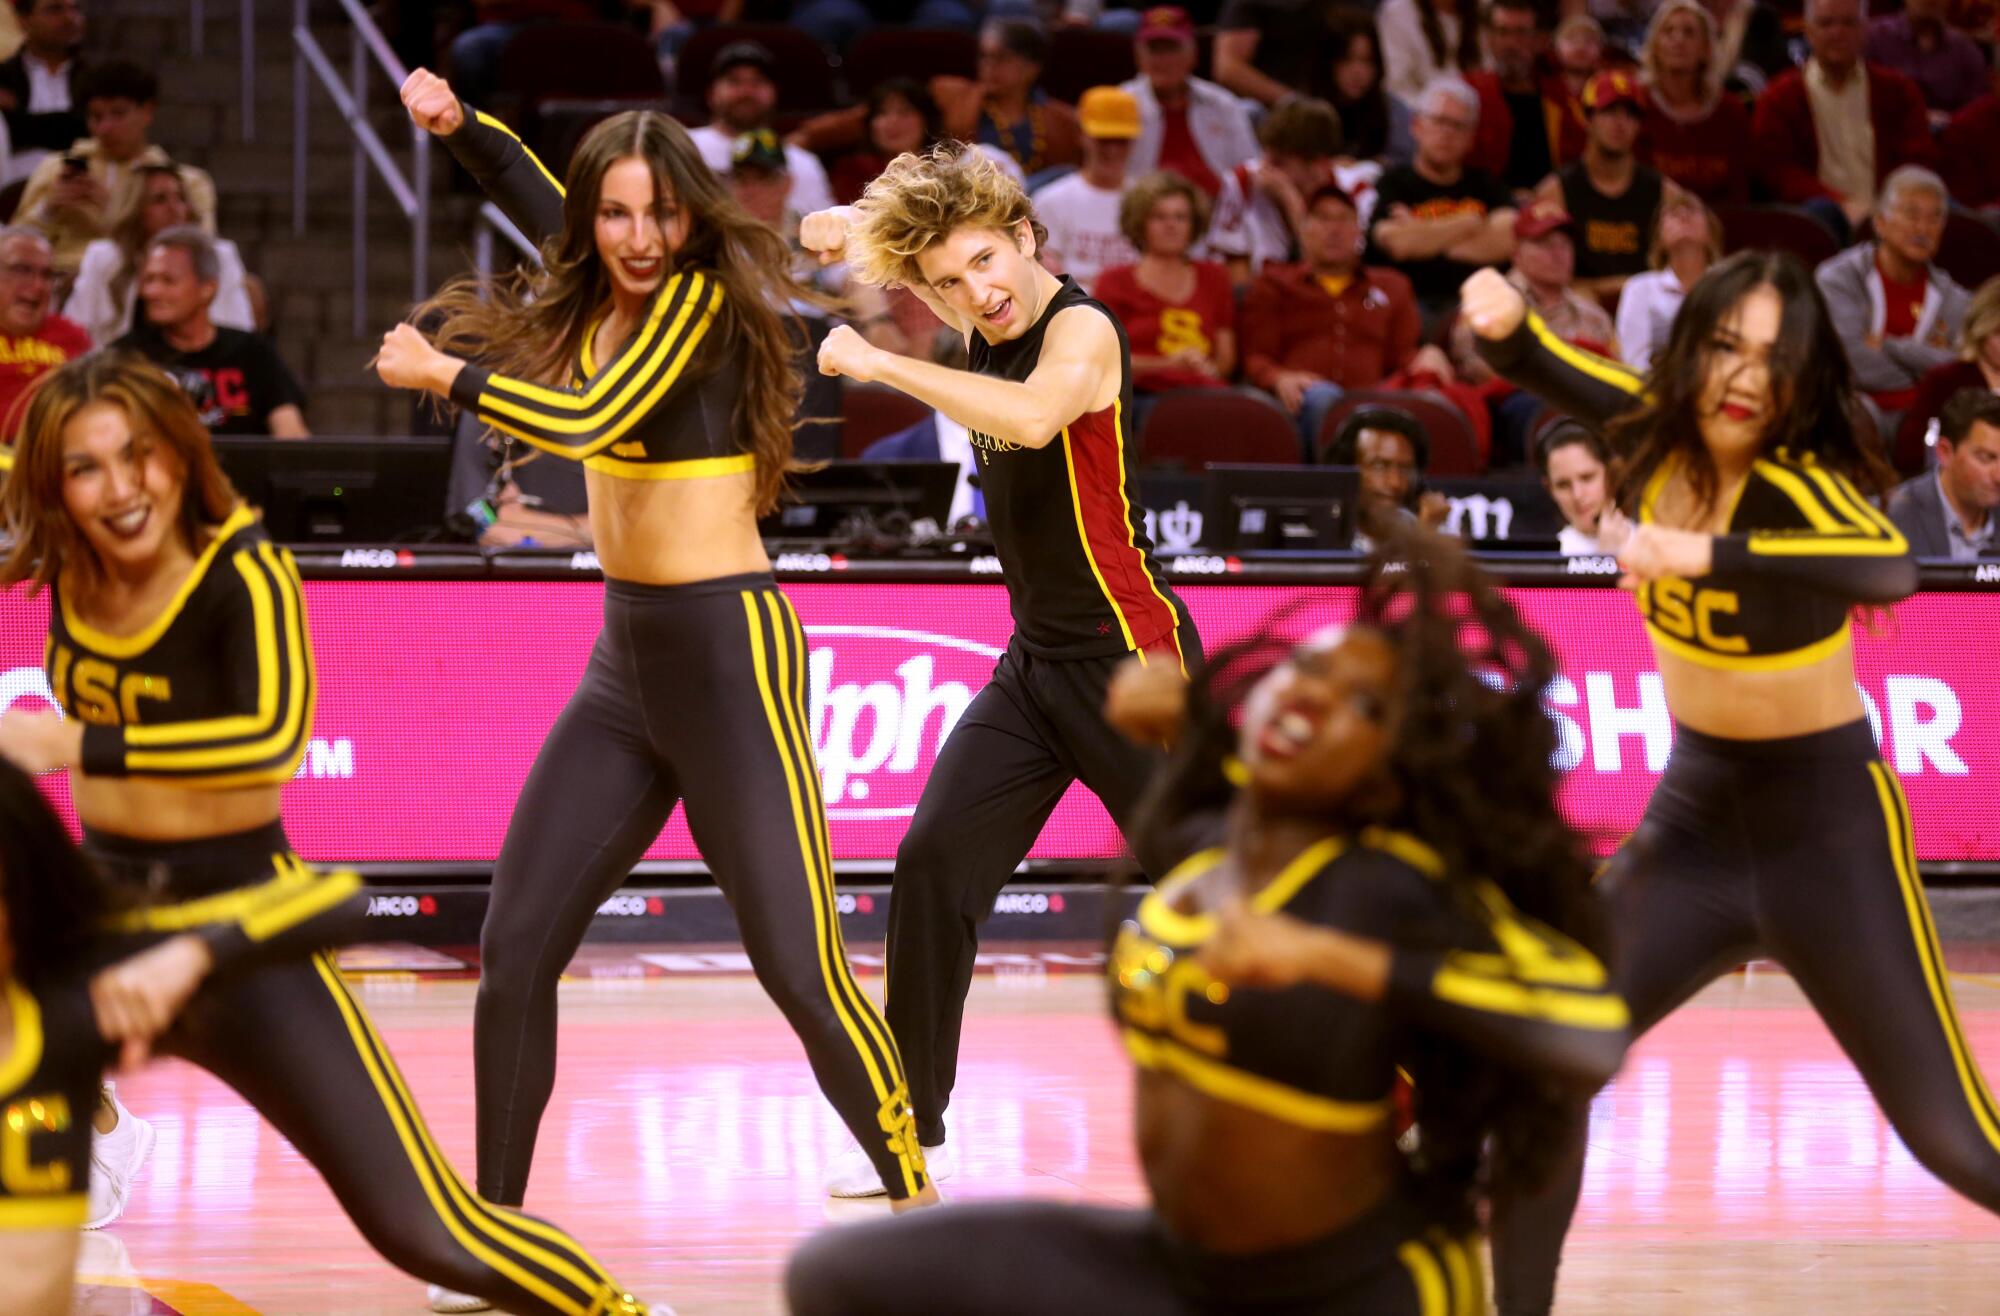 Hugo Miller, center, performs with USC's Trojan Dance Force at Galen Center.